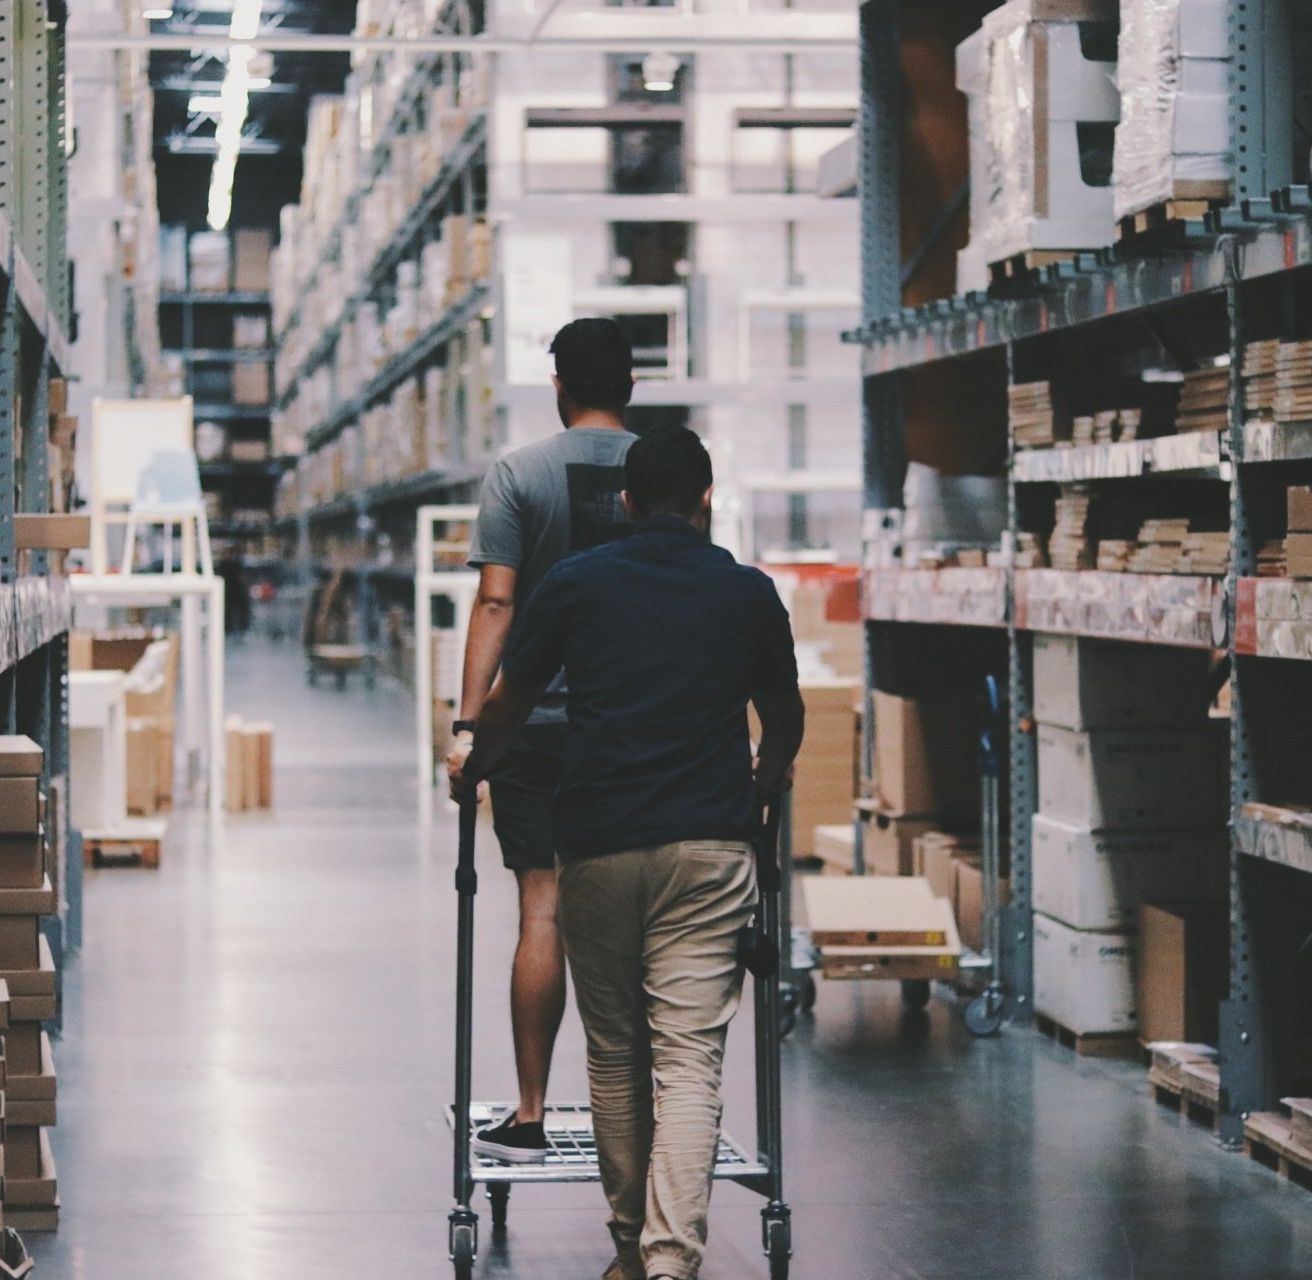 two men pushing a cart in a warehouse with boxes on the shelves